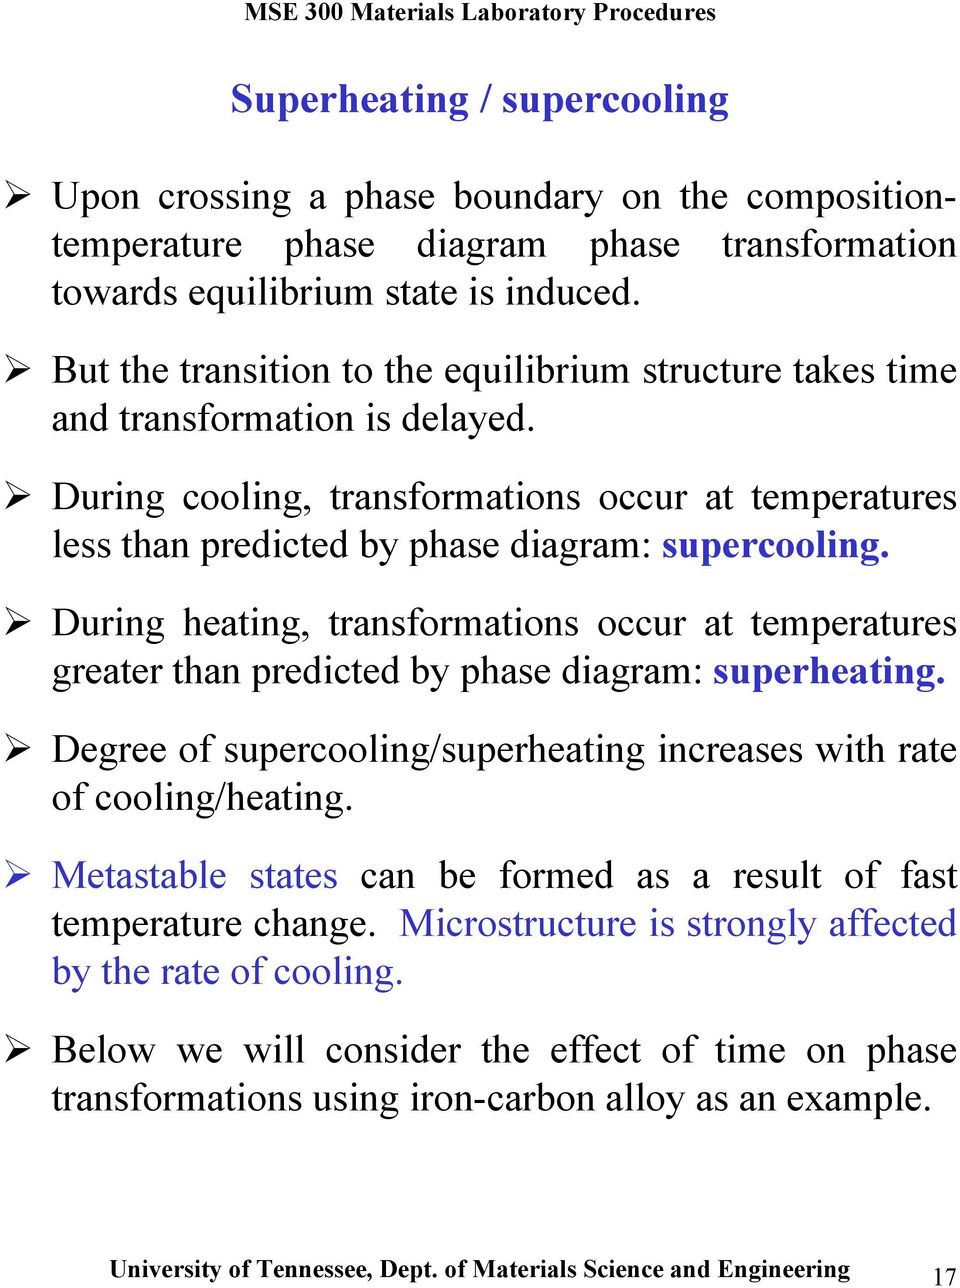 During heating, transformations occur at temperatures greater than predicted by phase diagram: superheating. Degree of supercooling/superheating increases with rate of cooling/heating.